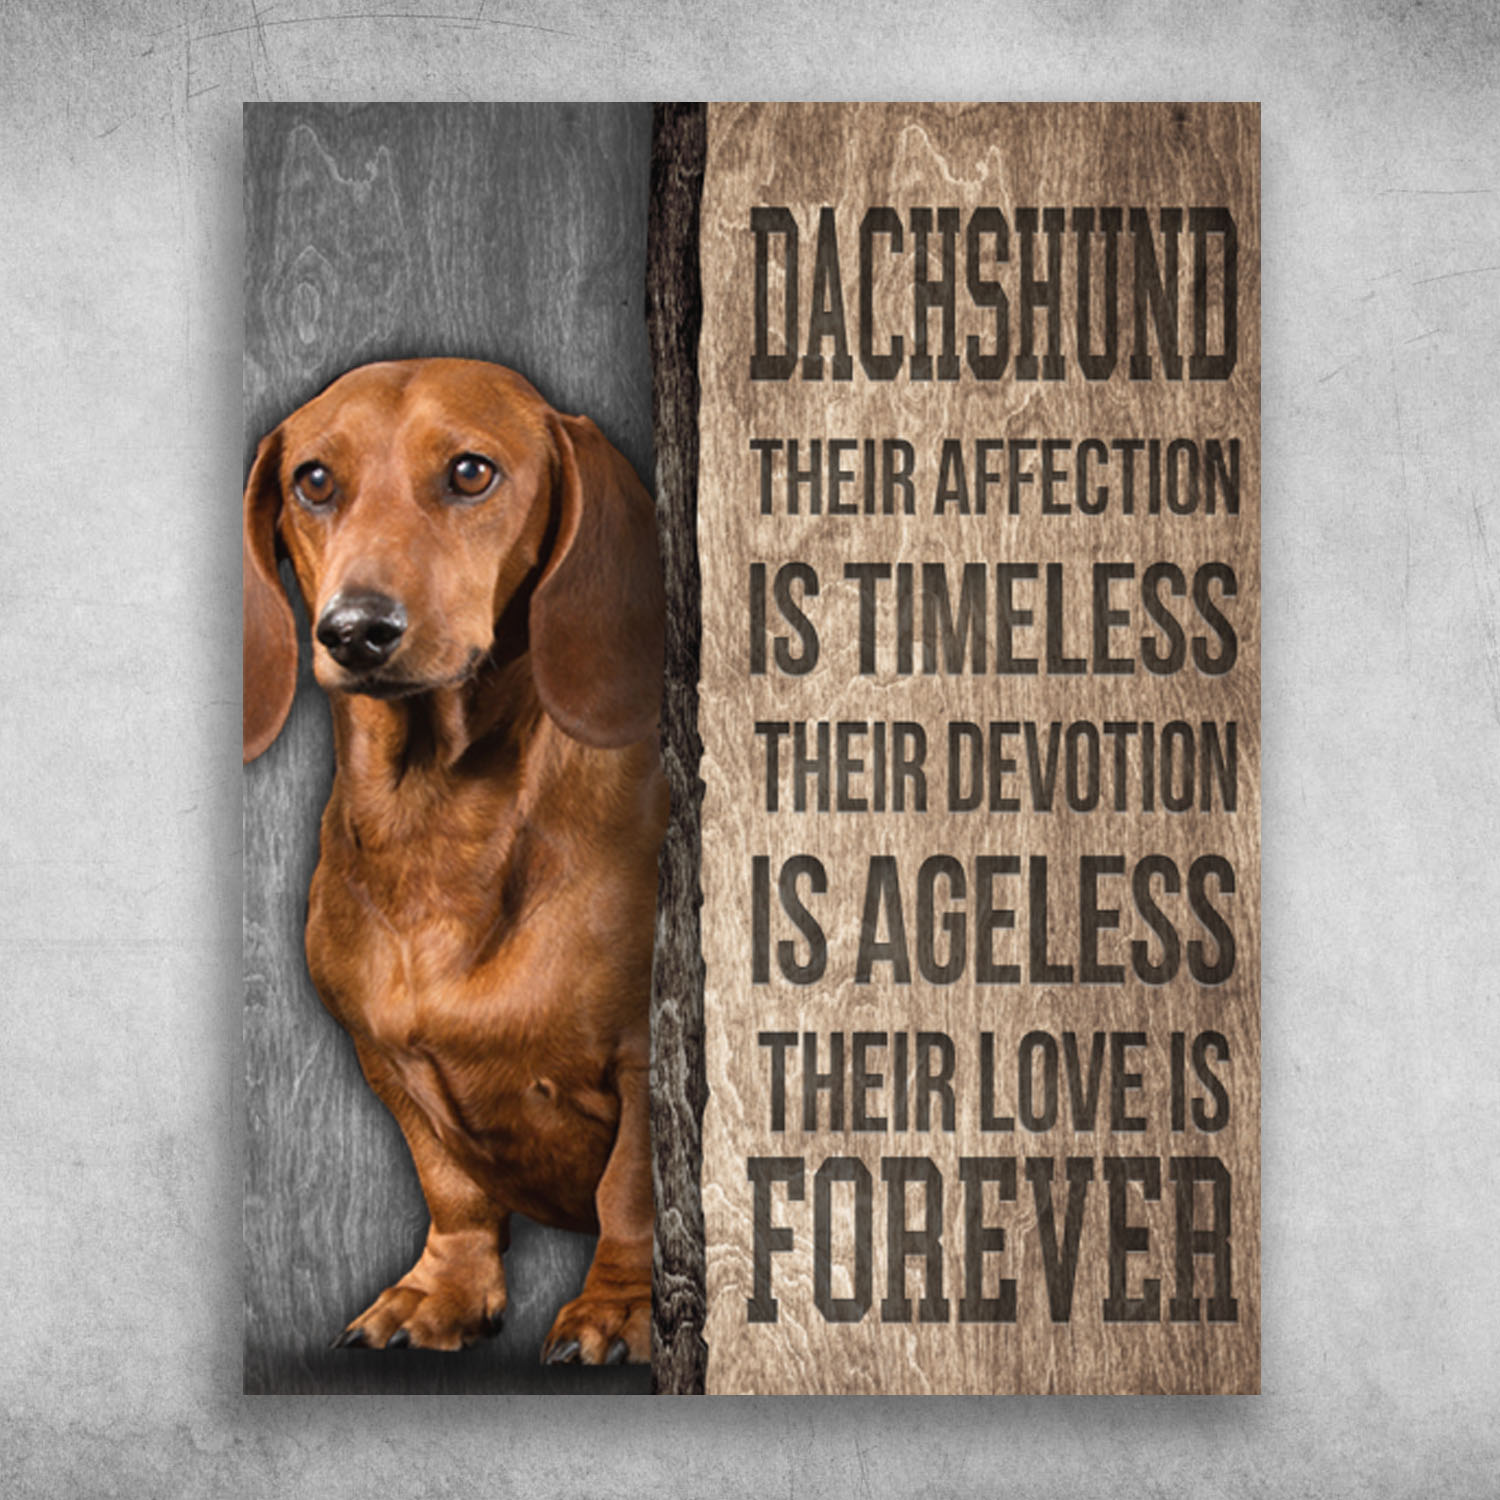 Dachshund Their Affection Is Timeless Their Love Is Forever